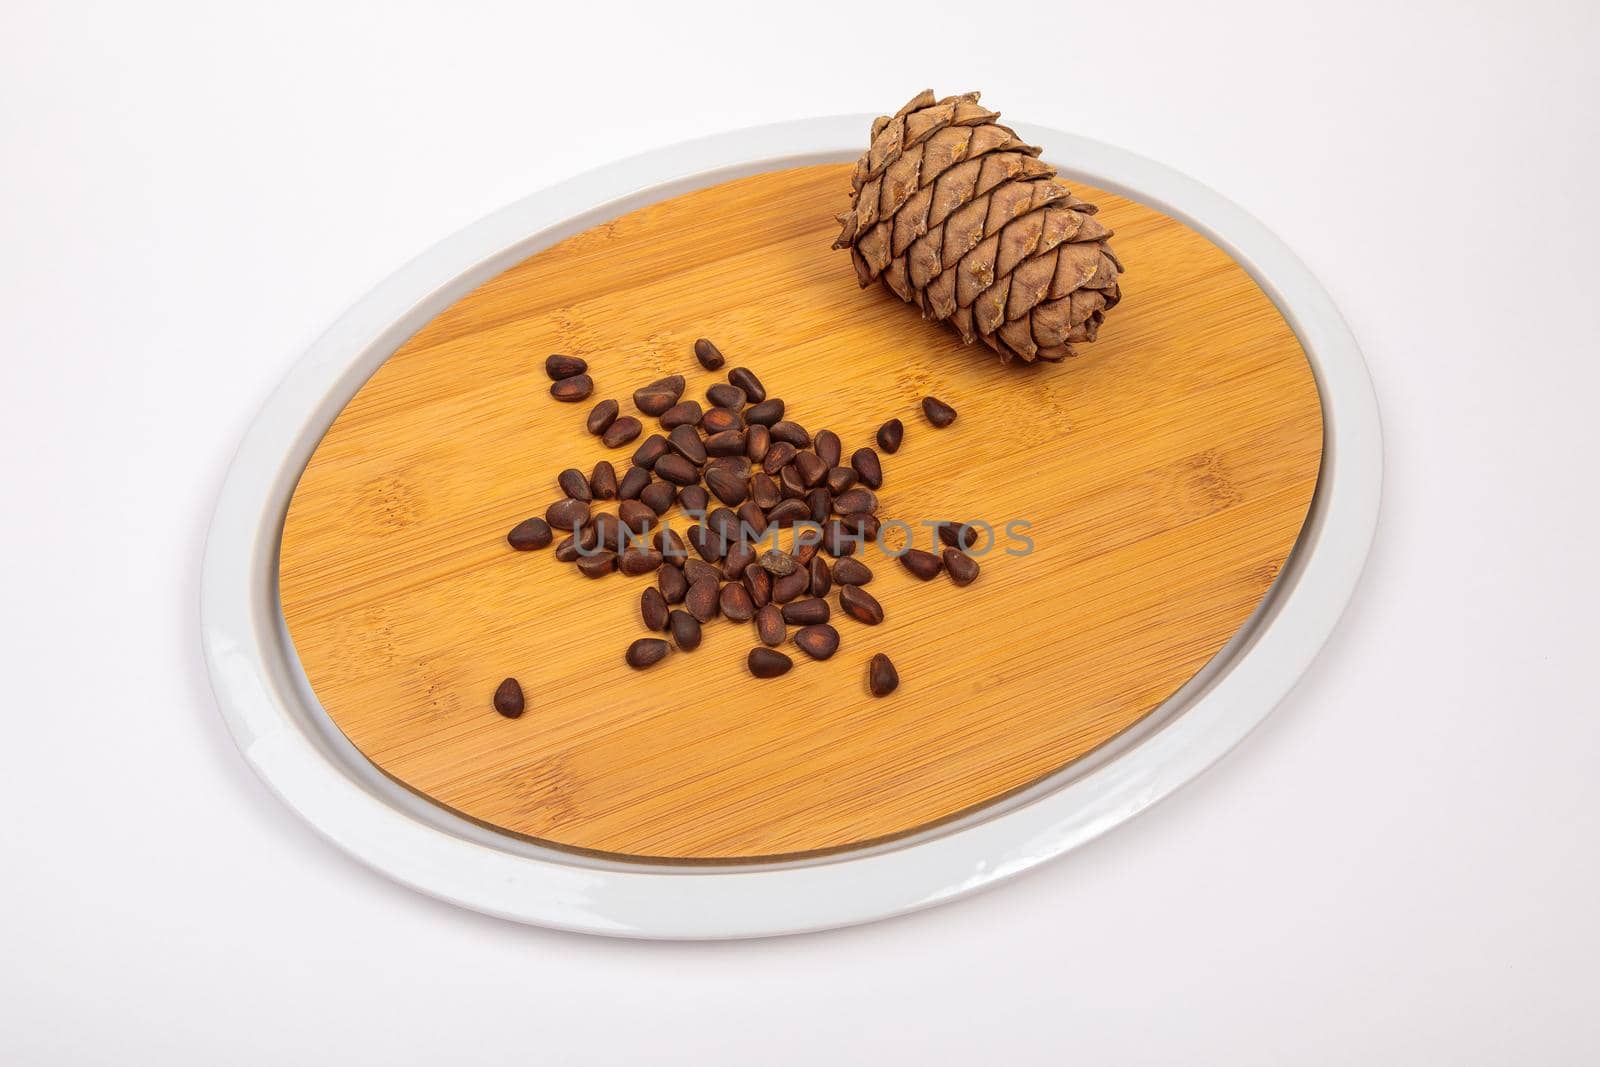 Siberian cones fruit - pine nuts on a kitchen cutting board by Yurich32